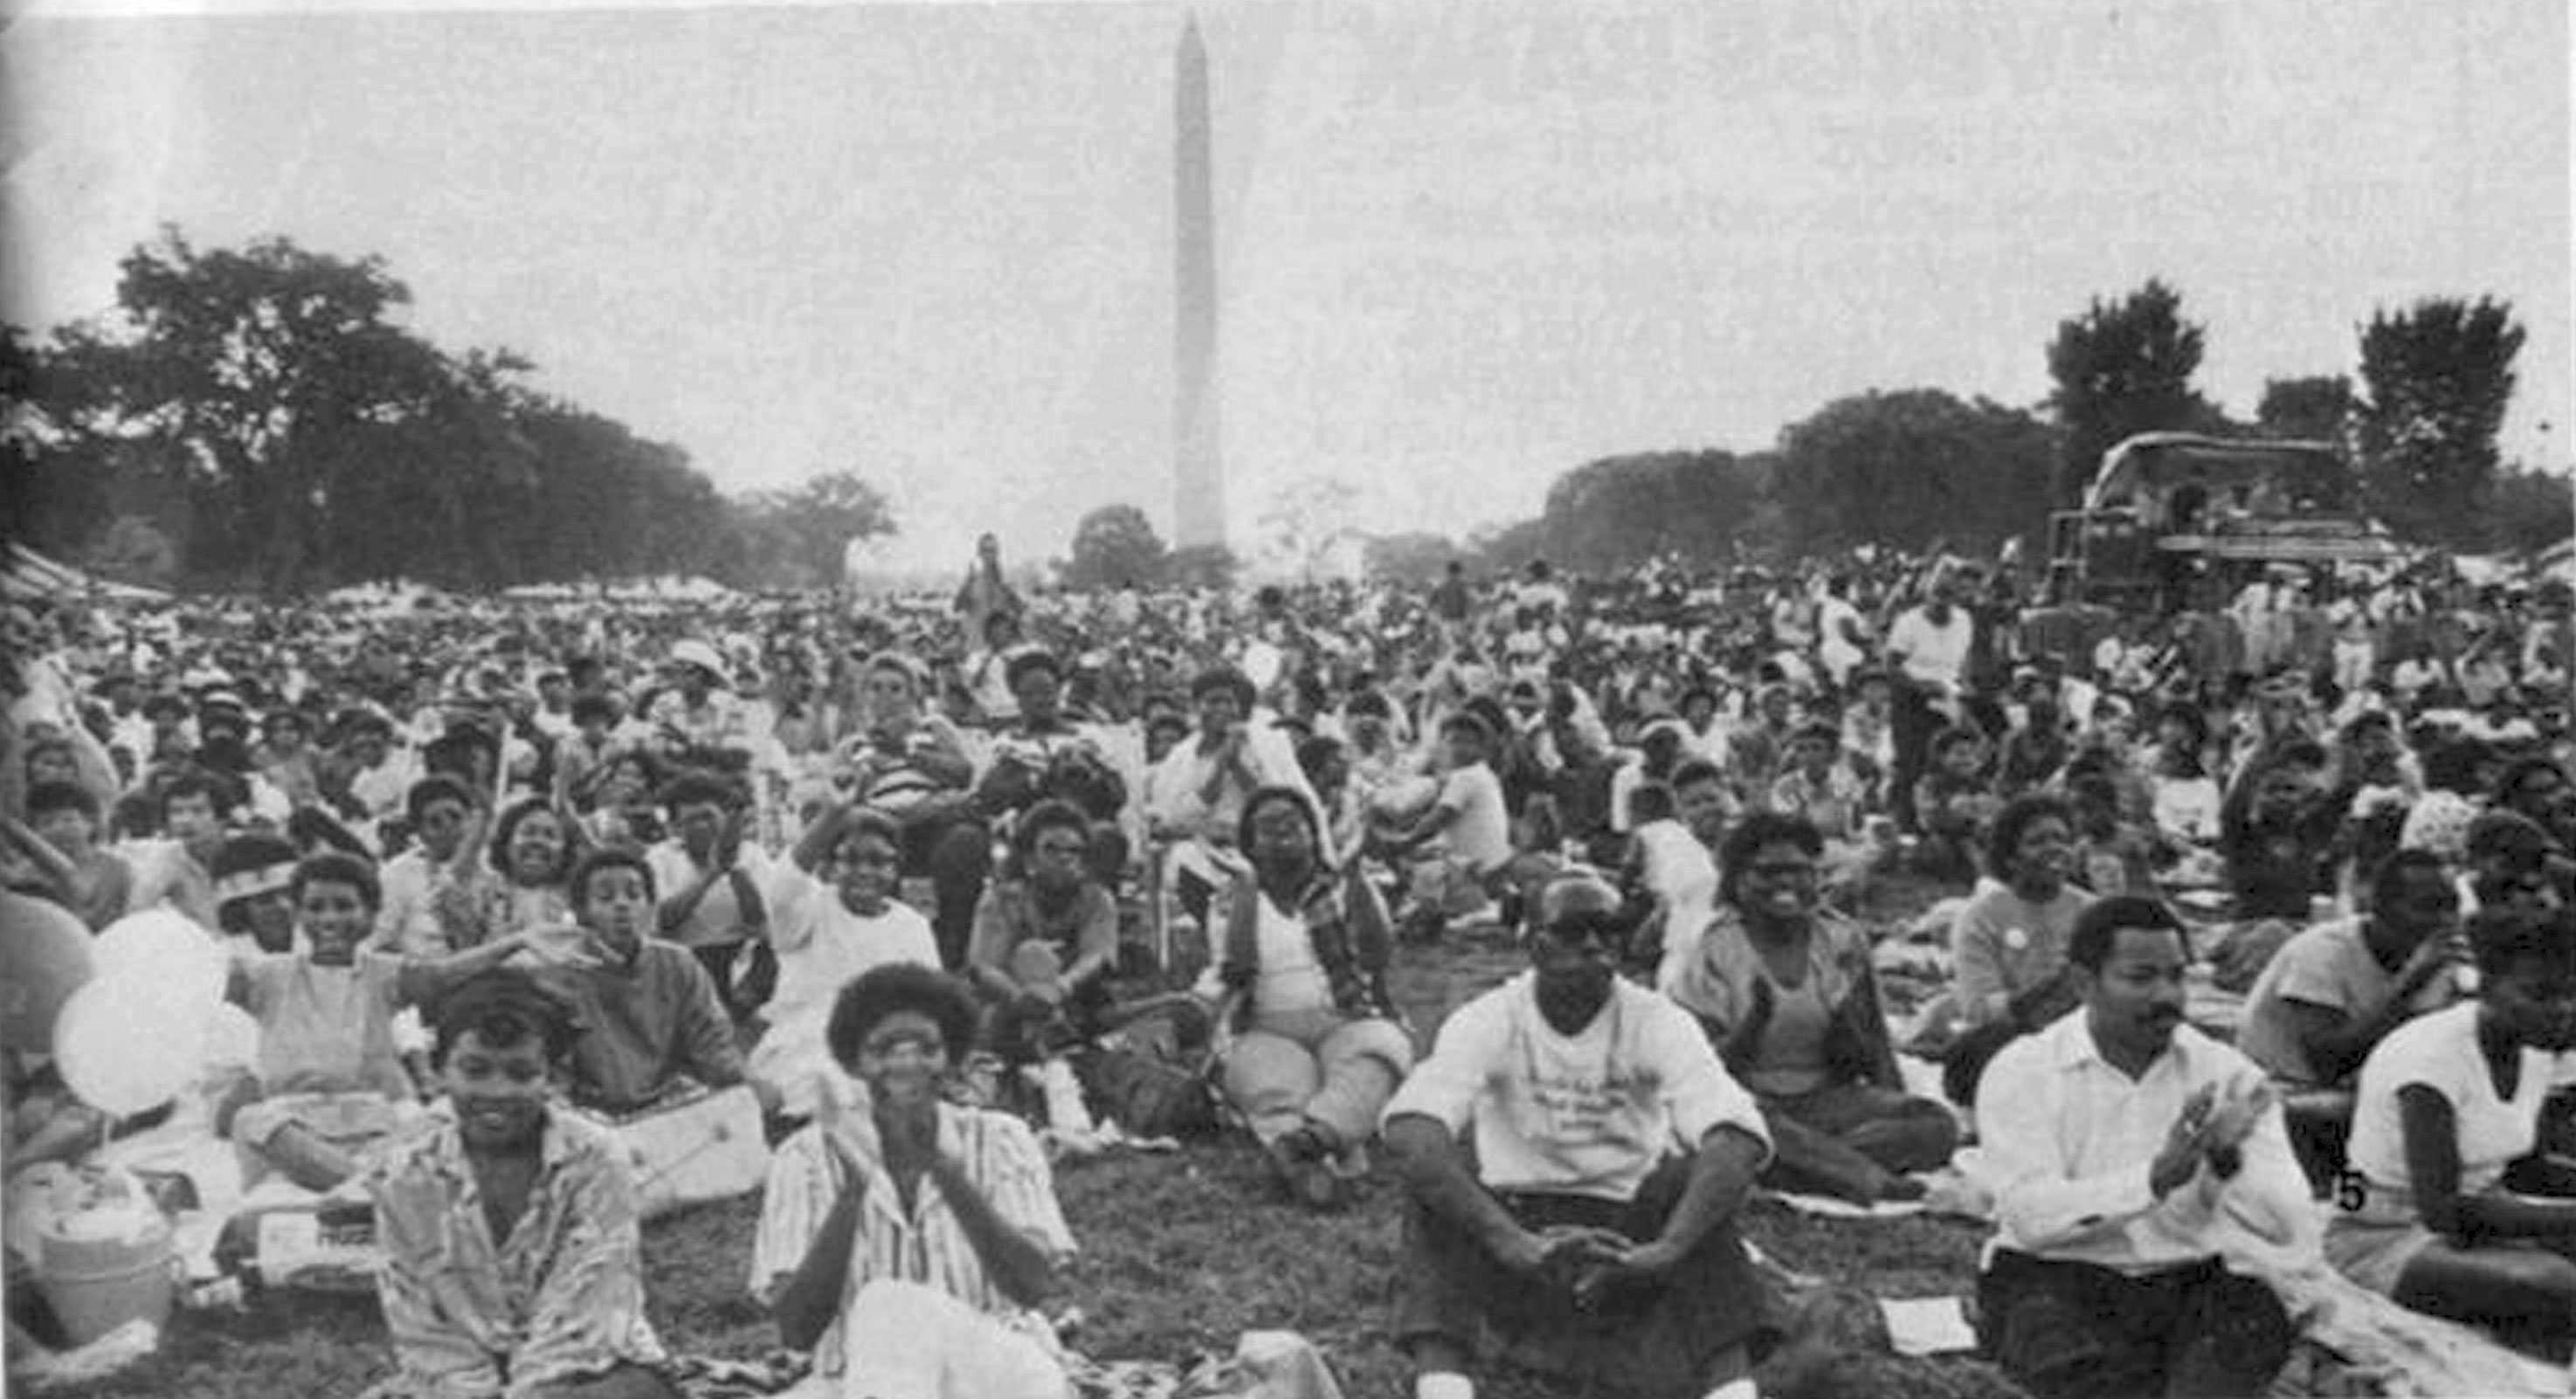 A older black and white photograph of many people sitting on the lawn in Washington, D.C.